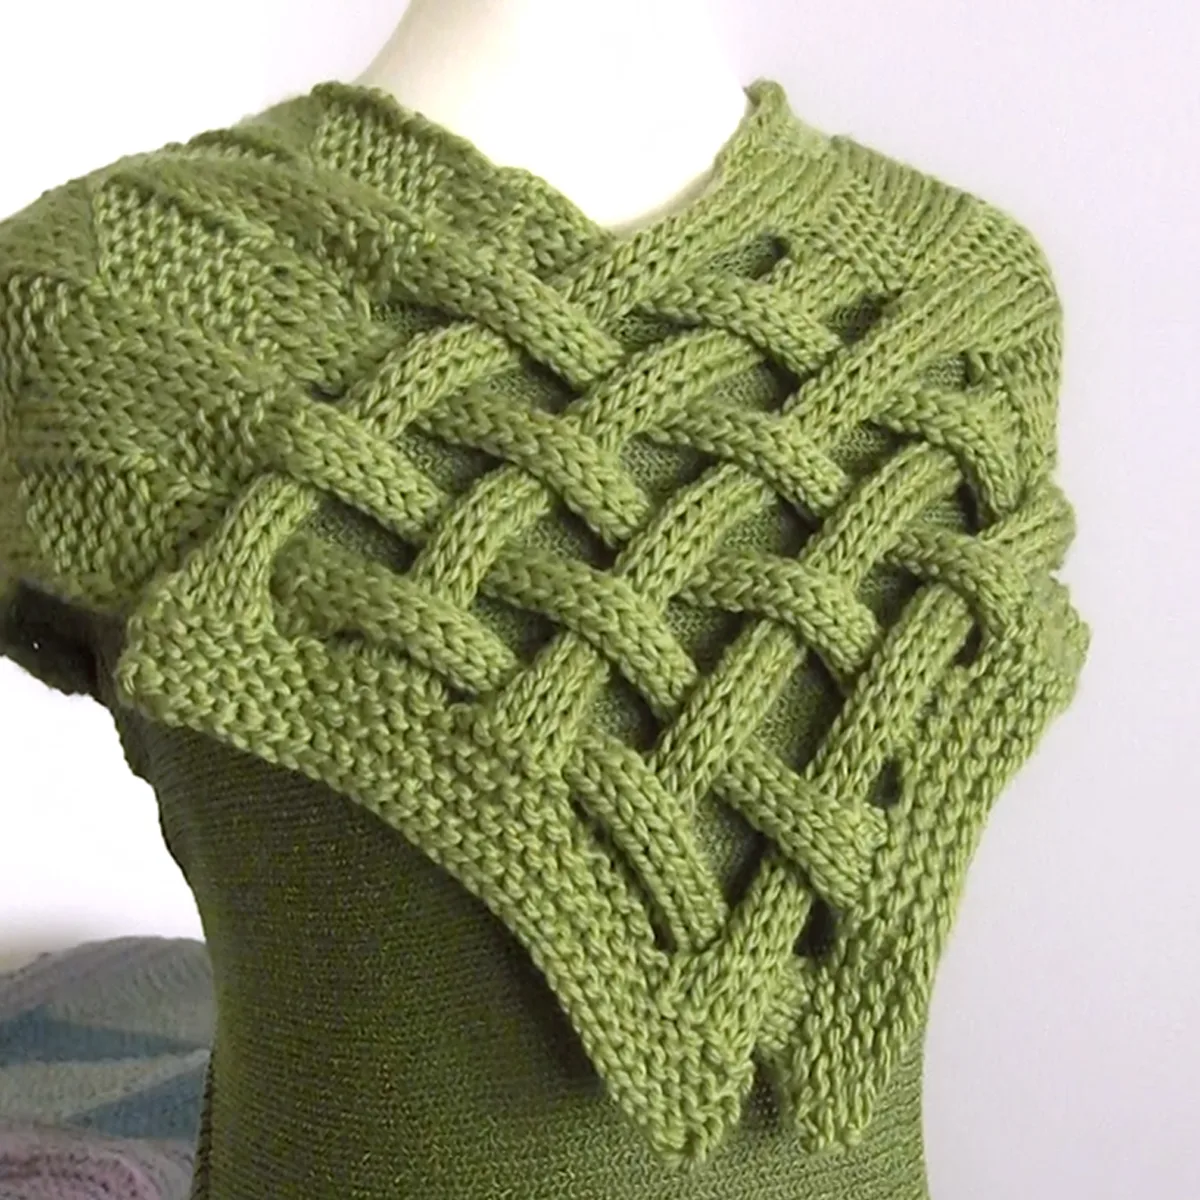 Celtic Saxon Braided Scarf in green yarn on mannequin.